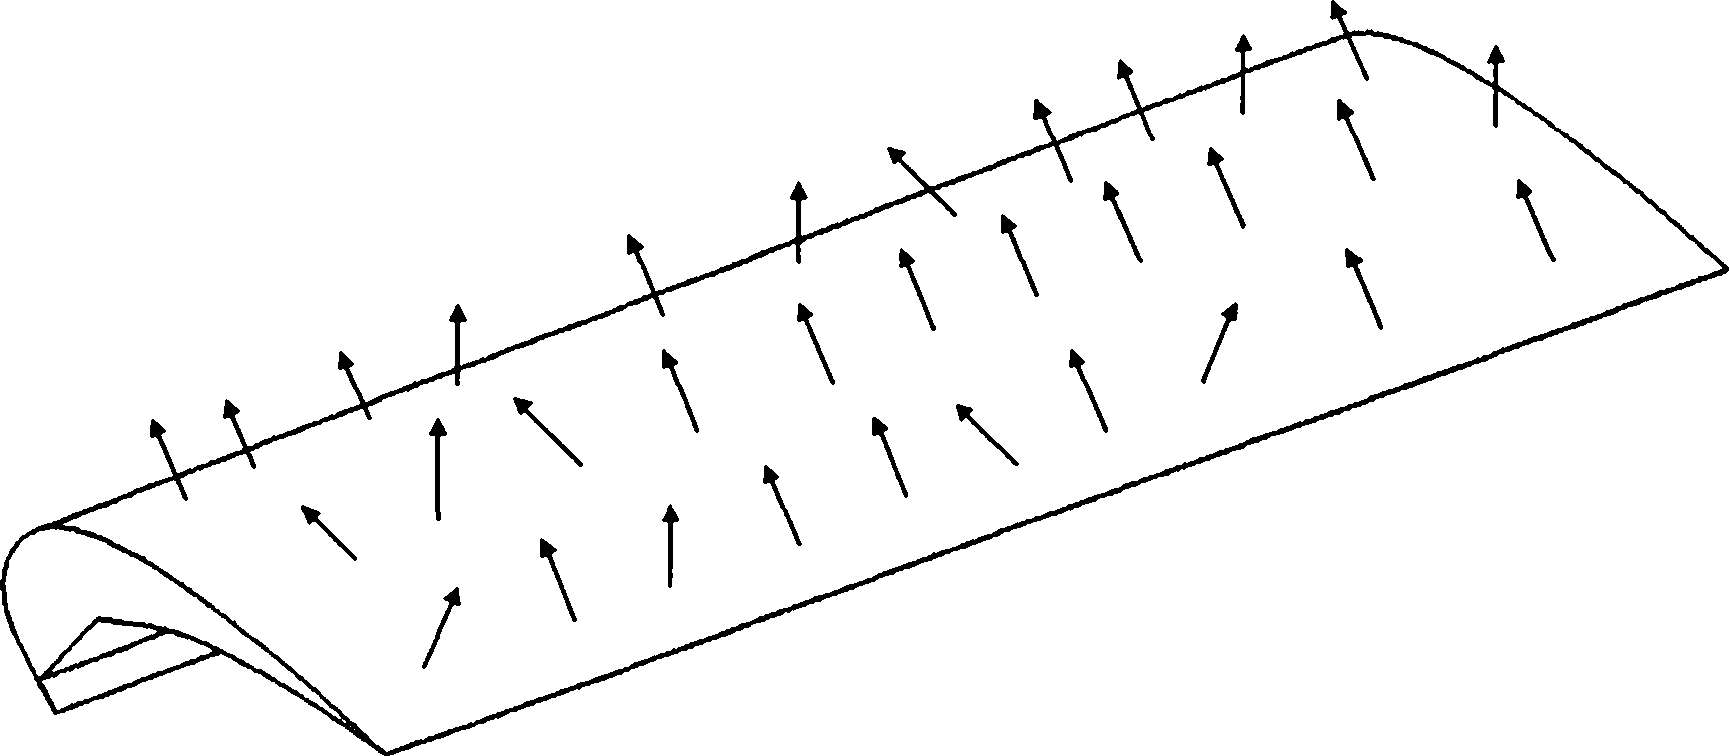 Aerodynamic load loading method used for reliability tests on aircraft flap and slat system